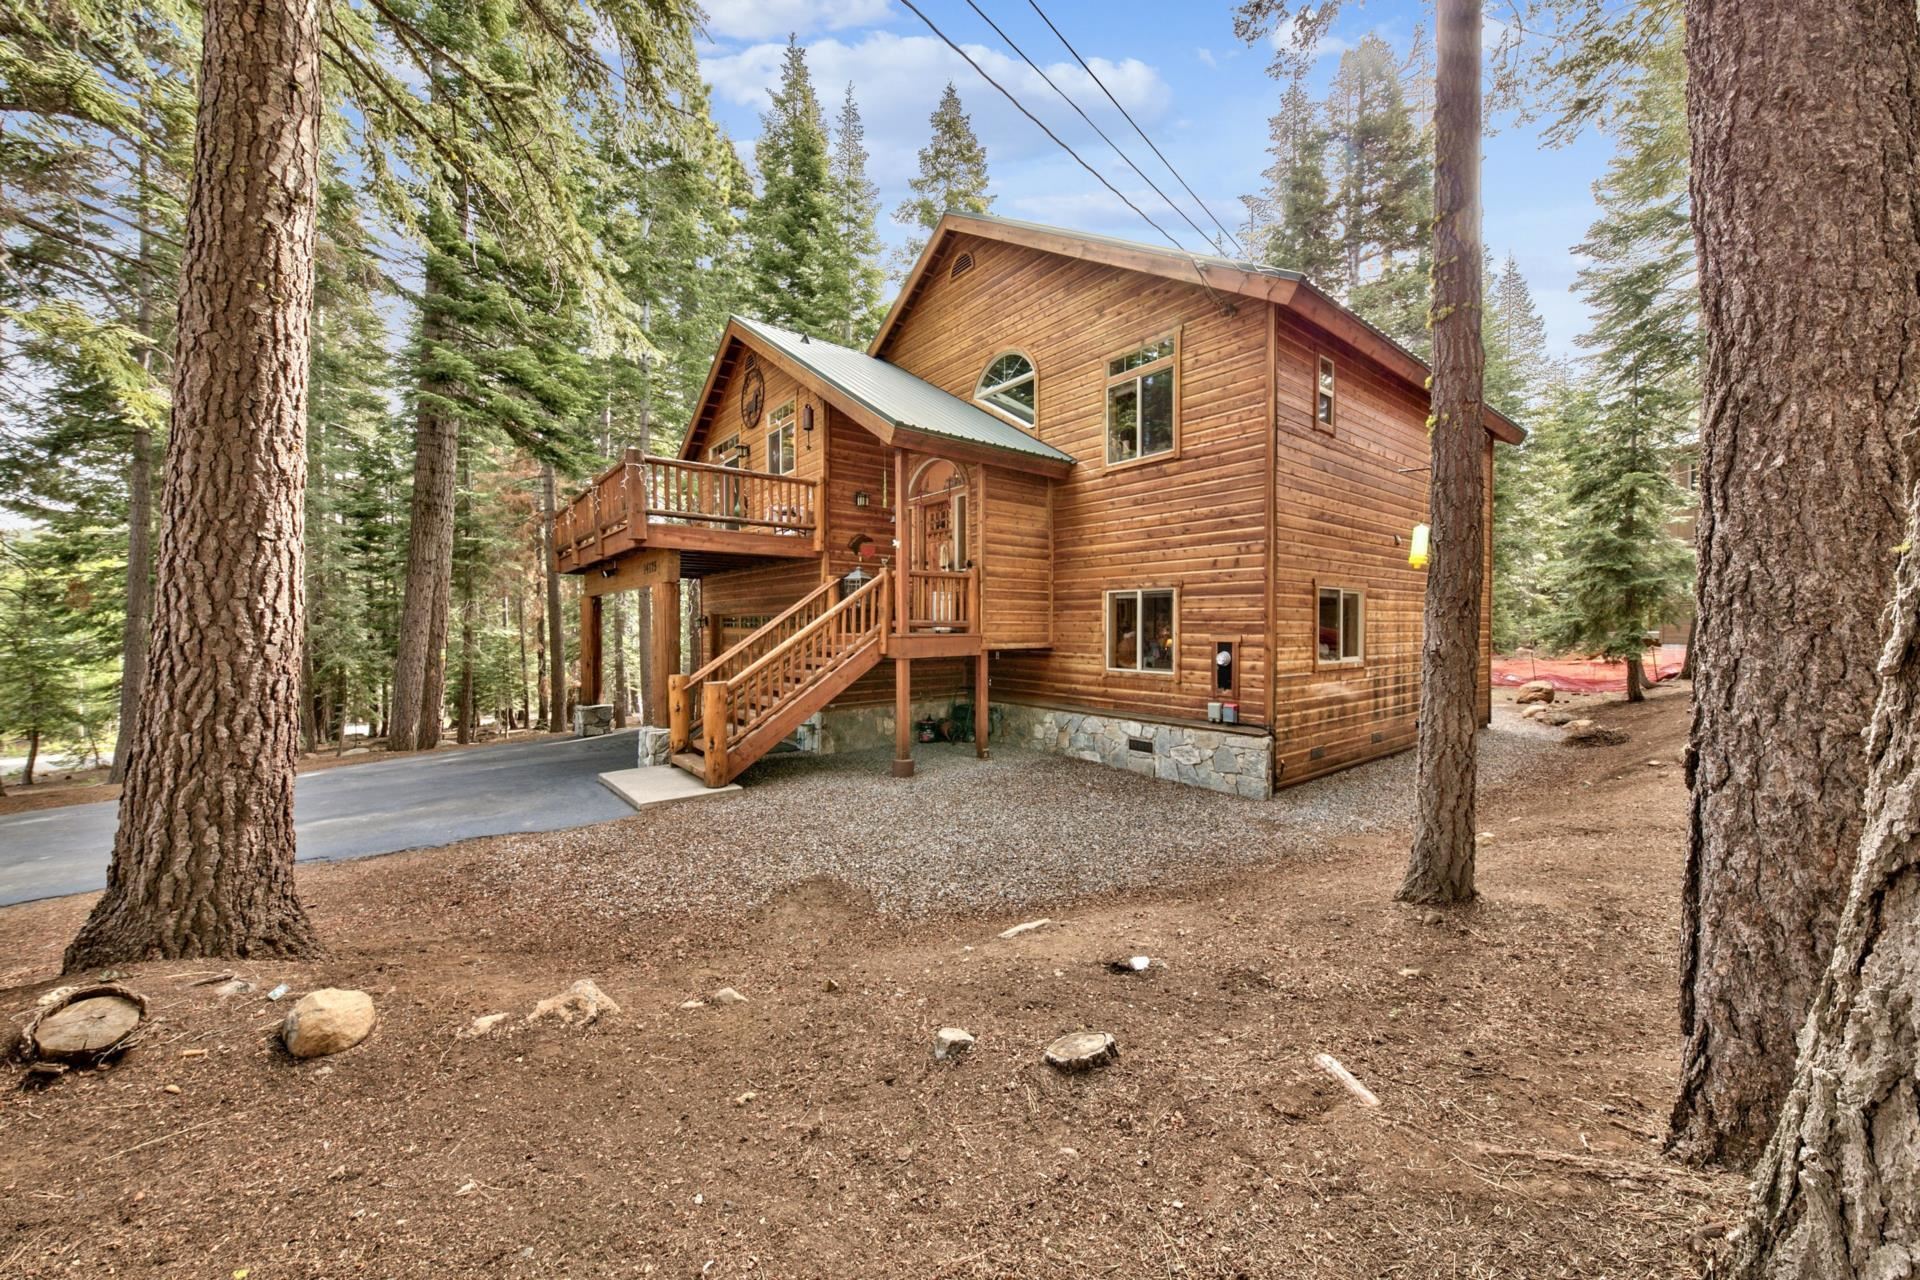 Image for 14175 Pathway Avenue, Truckee, CA 96161-6228